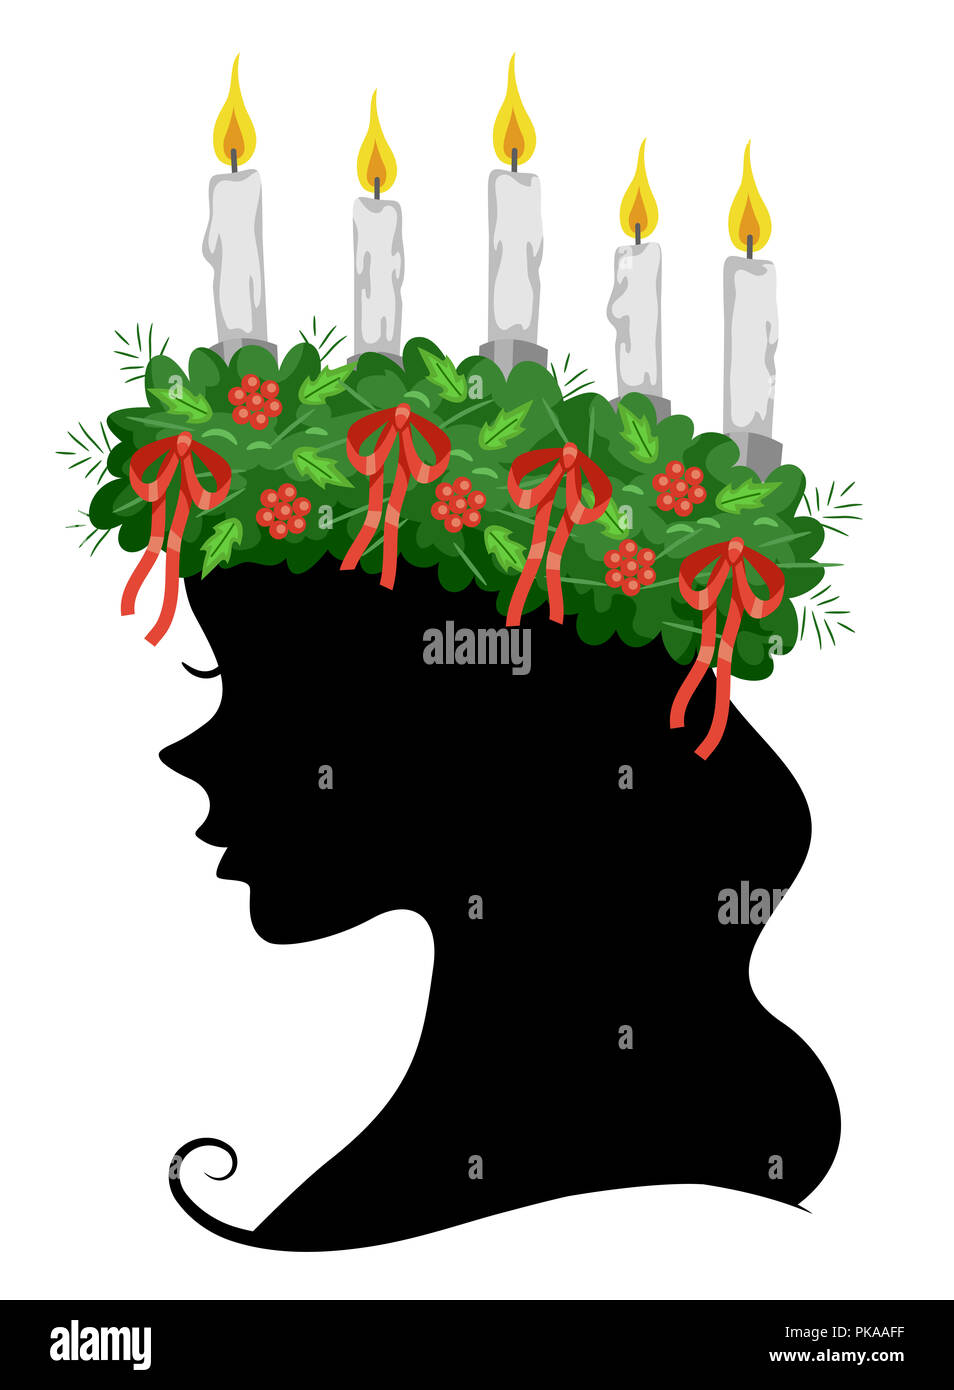 Illustration of a Girl Silhouette Wearing a Saint Lucia Crown for the Saint Lucia Feast Stock Photo